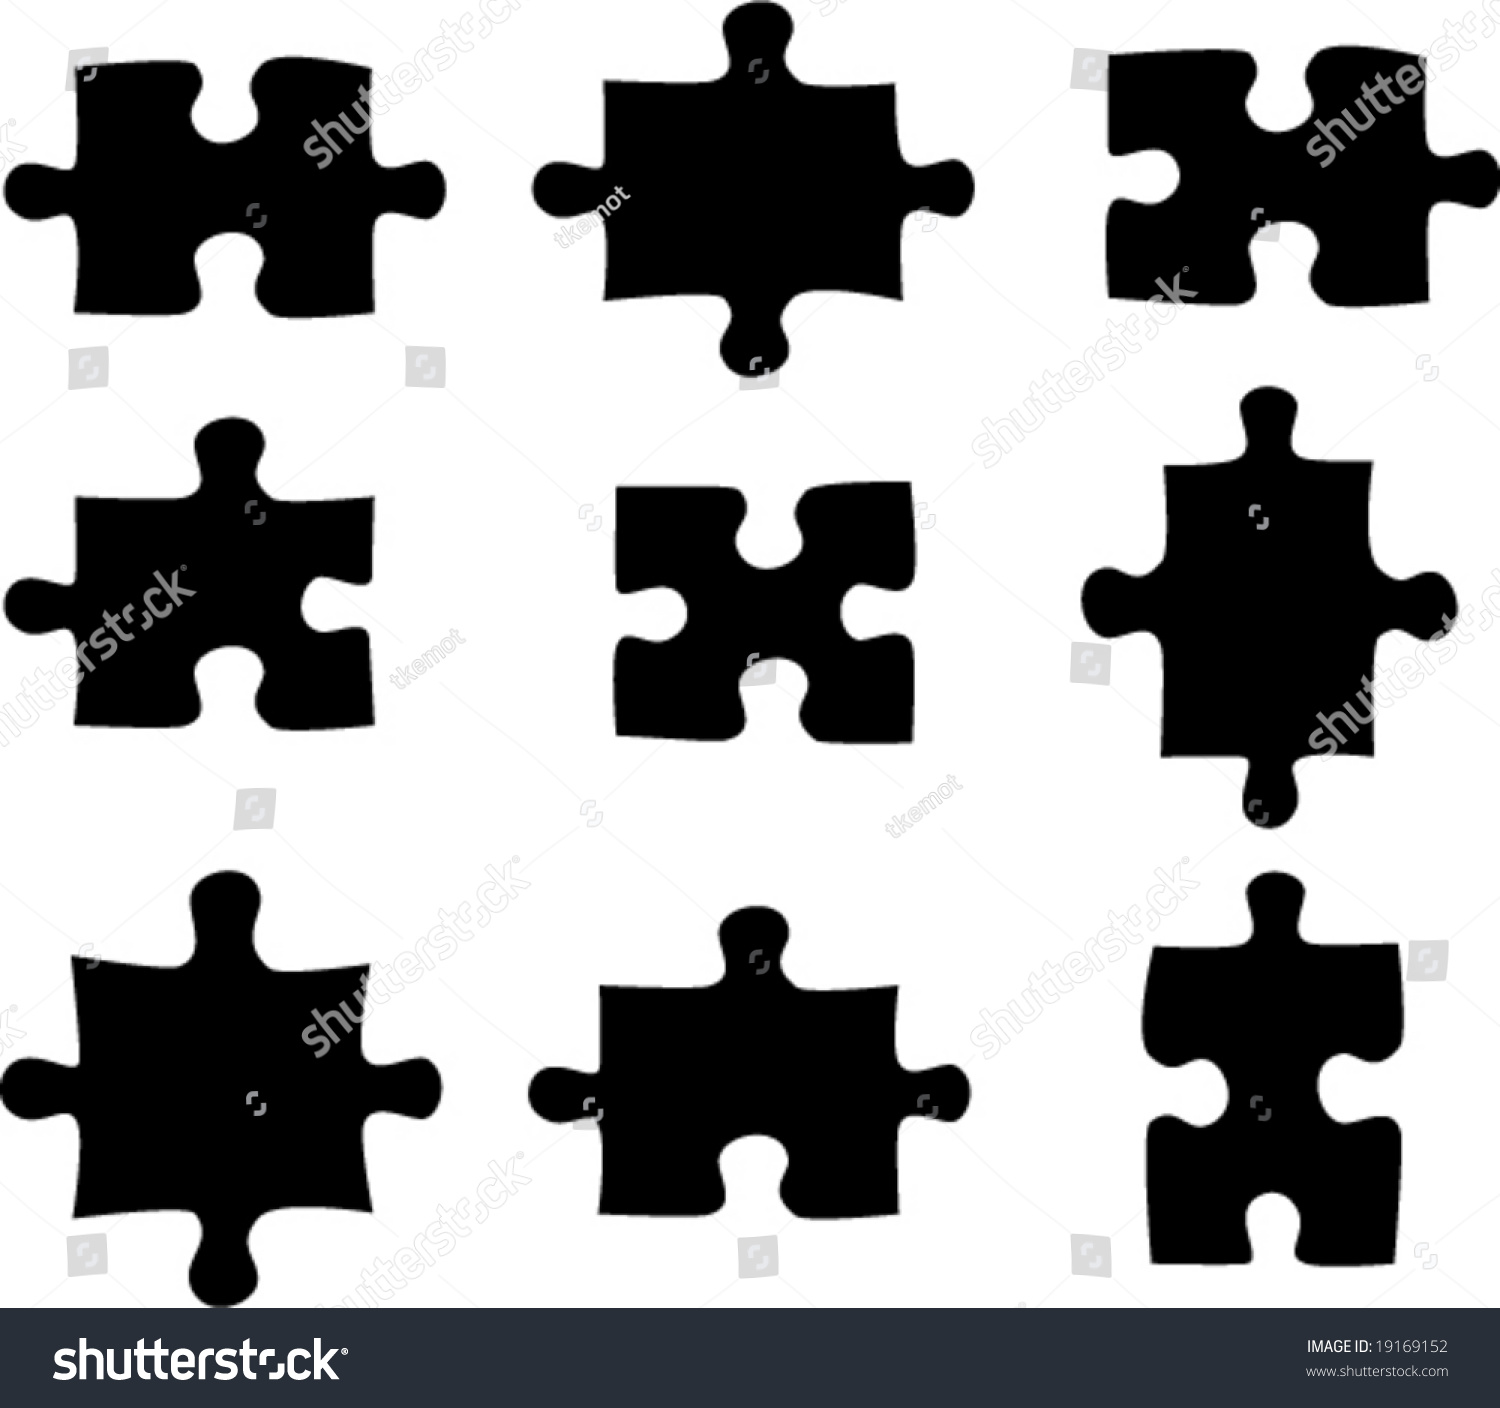 blank-puzzle-pieces-stock-vector-19169152-shutterstock